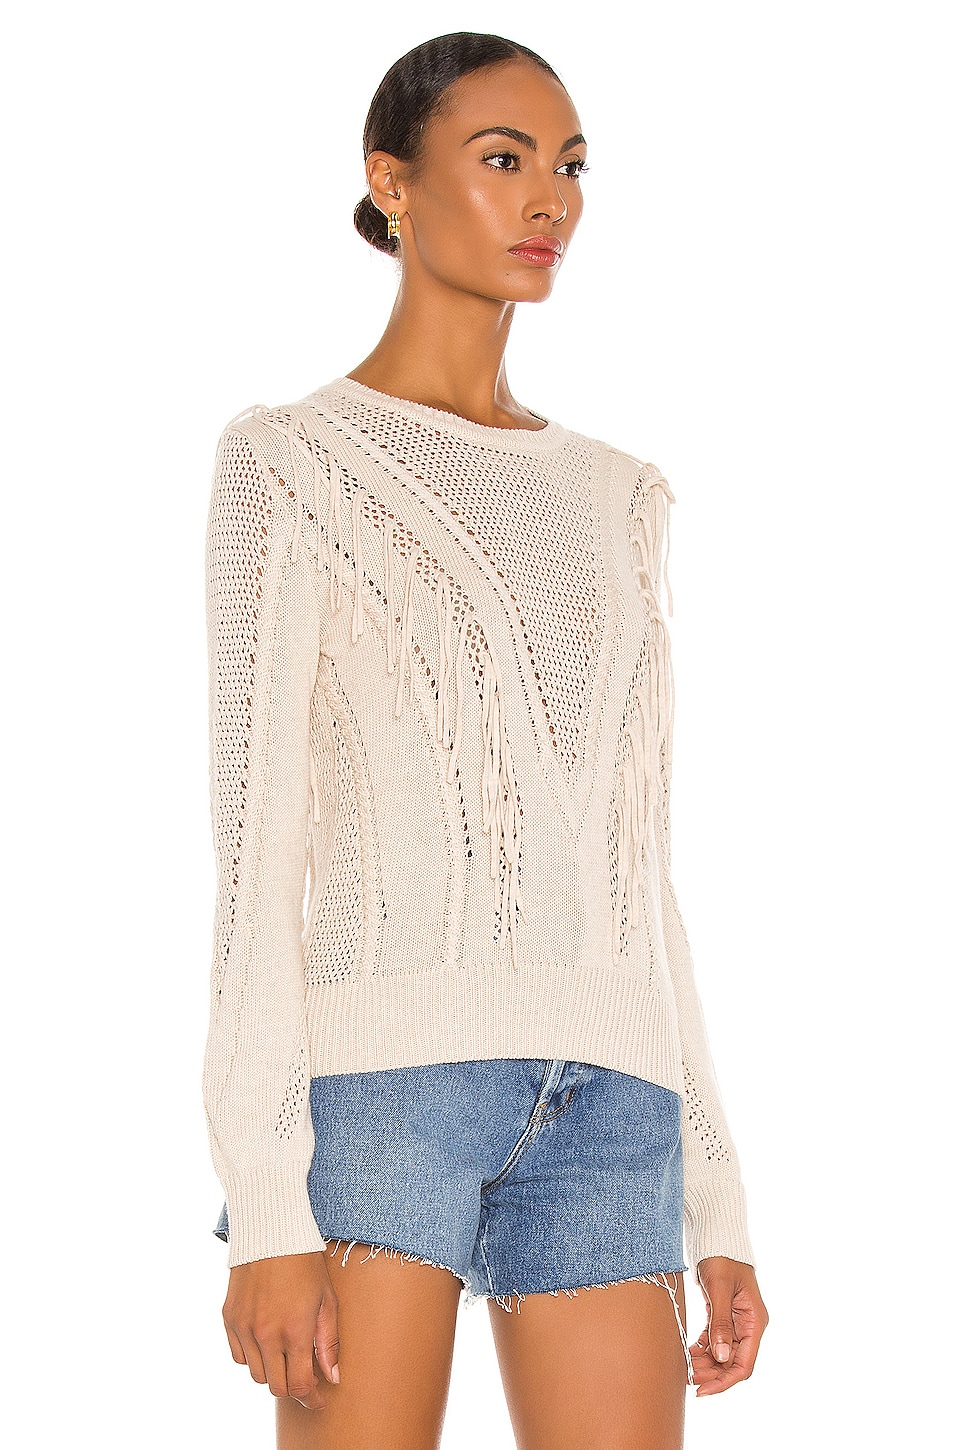 Autumn Cashmere Cable & Mesh Fringe Crew Sweater in Natural | REVOLVE